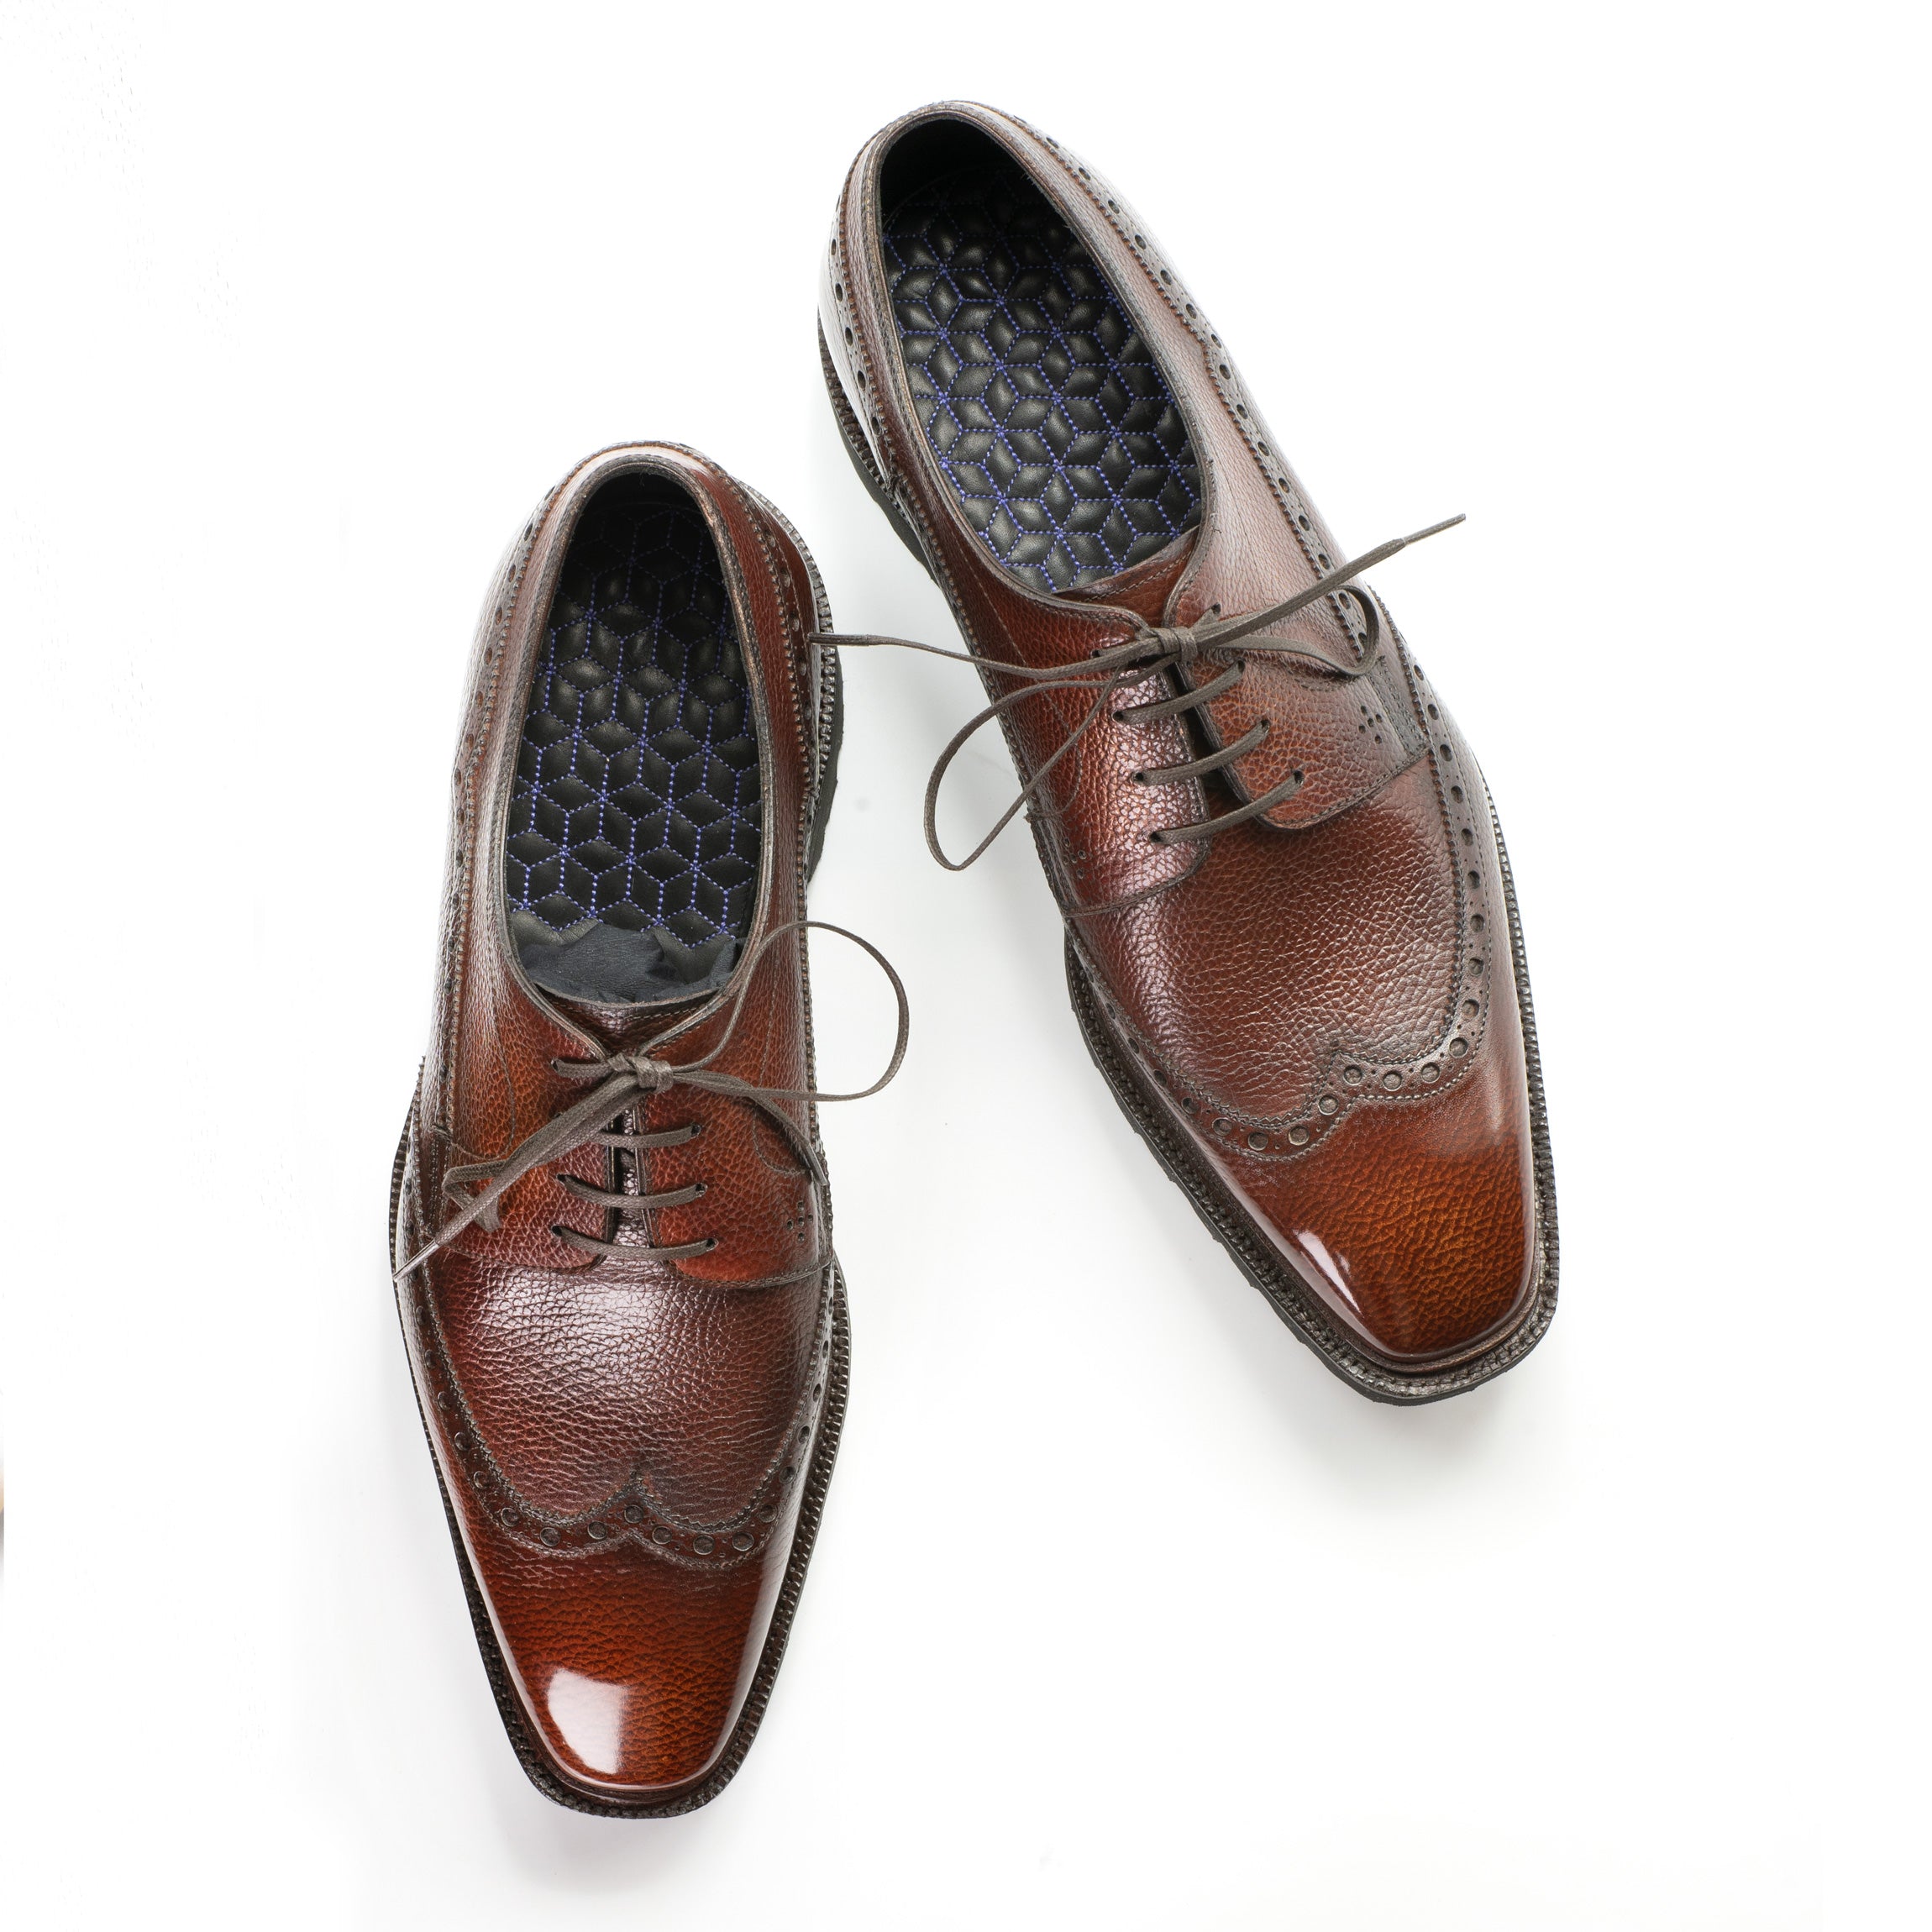 Coltrane Wingtip Balmoral Derby by Norman Vilalta Bespoke Sheomakers in Collaboration with Leffot